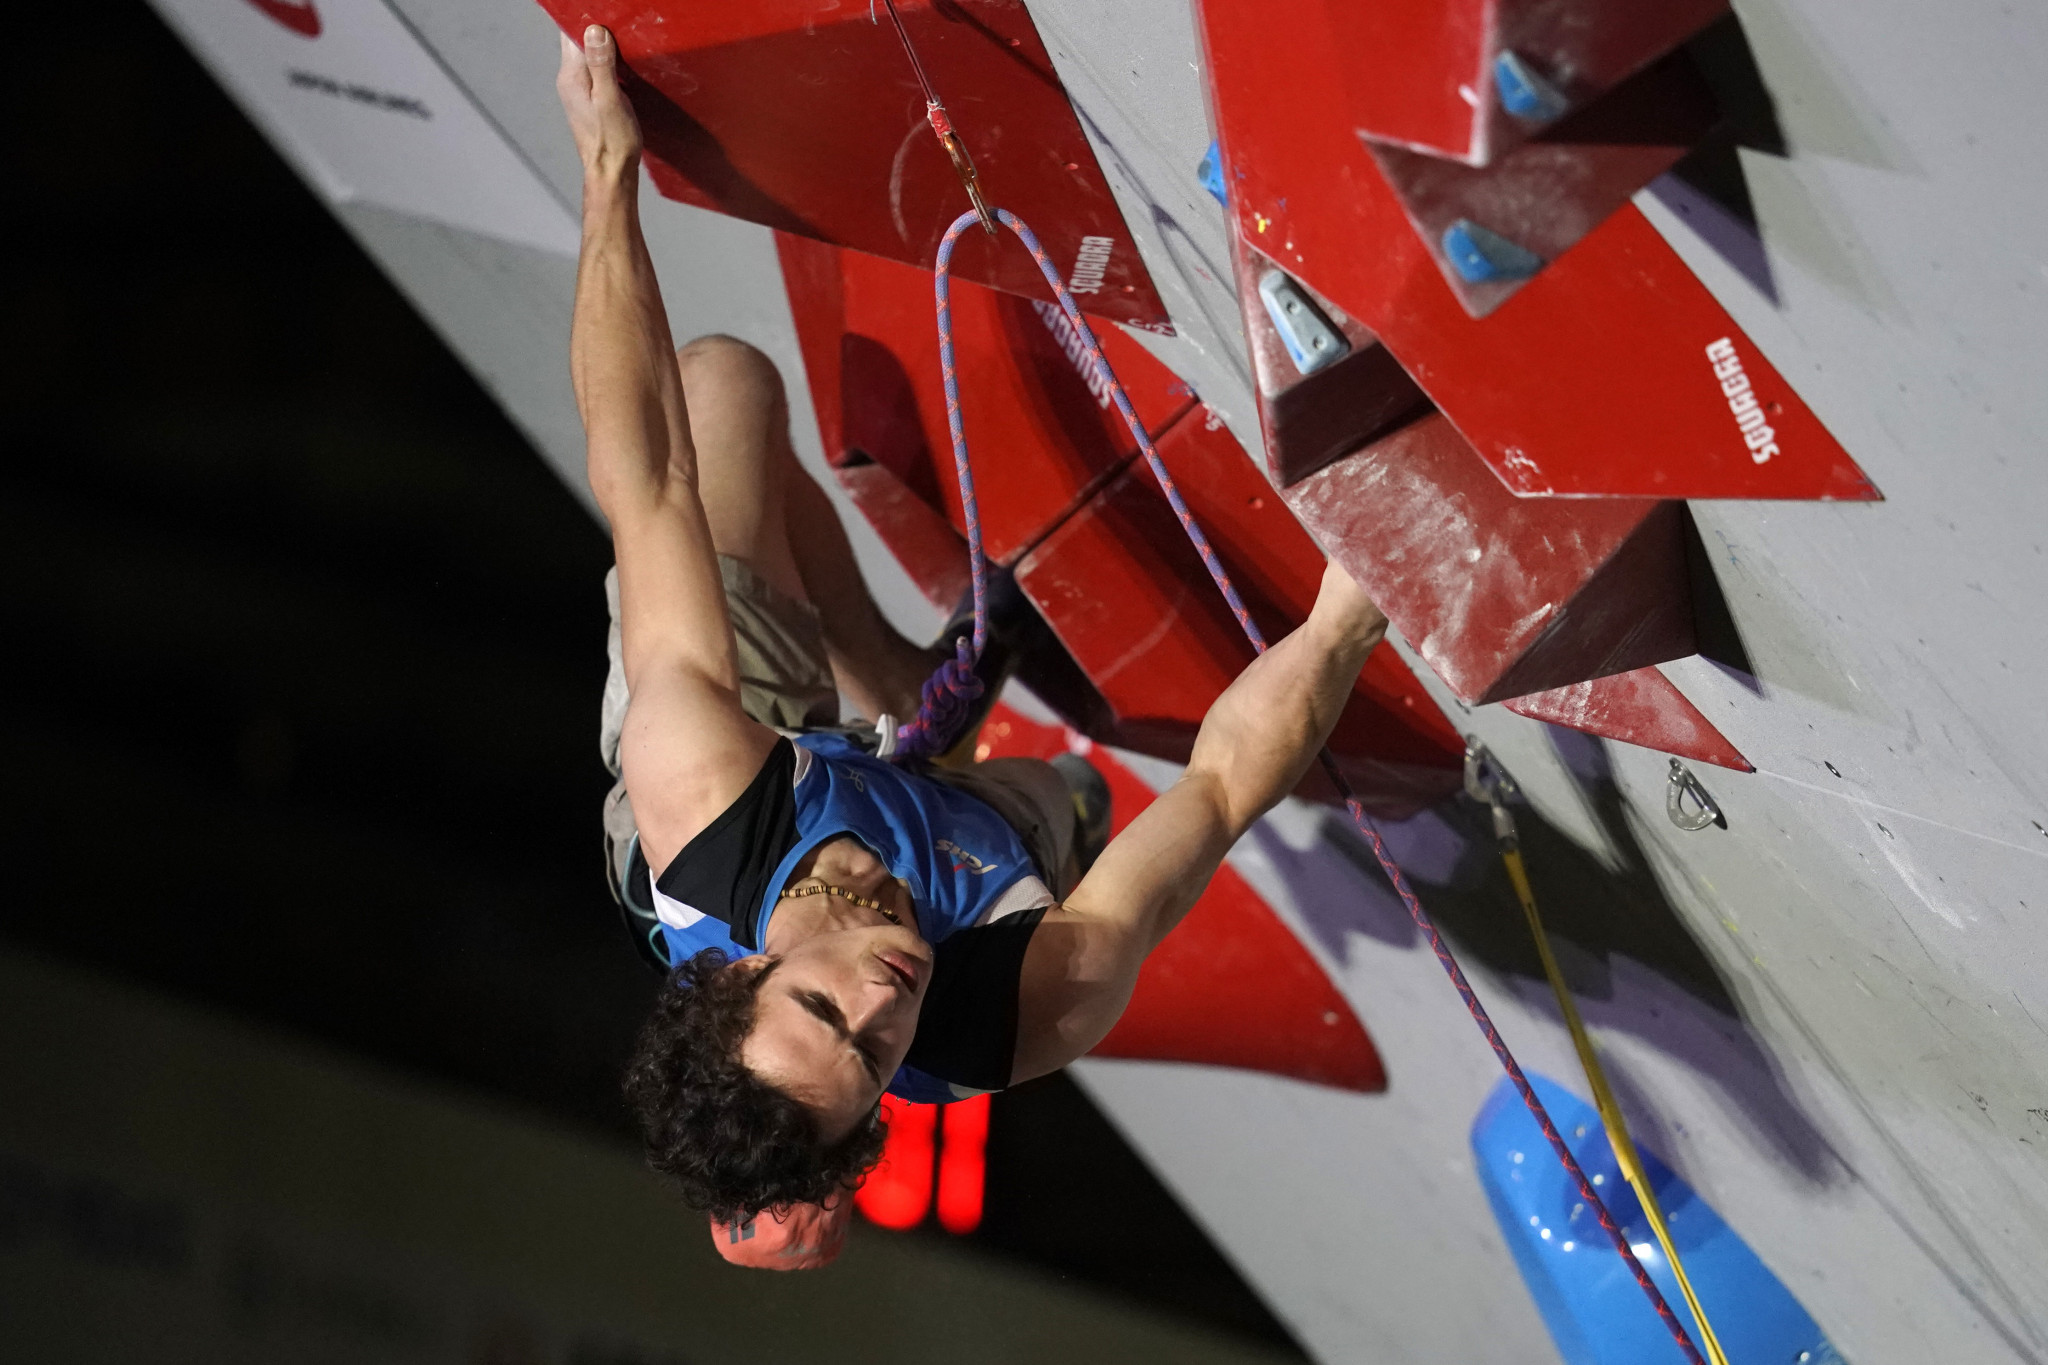 Adam Ondra won the men's lead event at the IFSC Climbing World Cup in Xiamen ©Getty Images